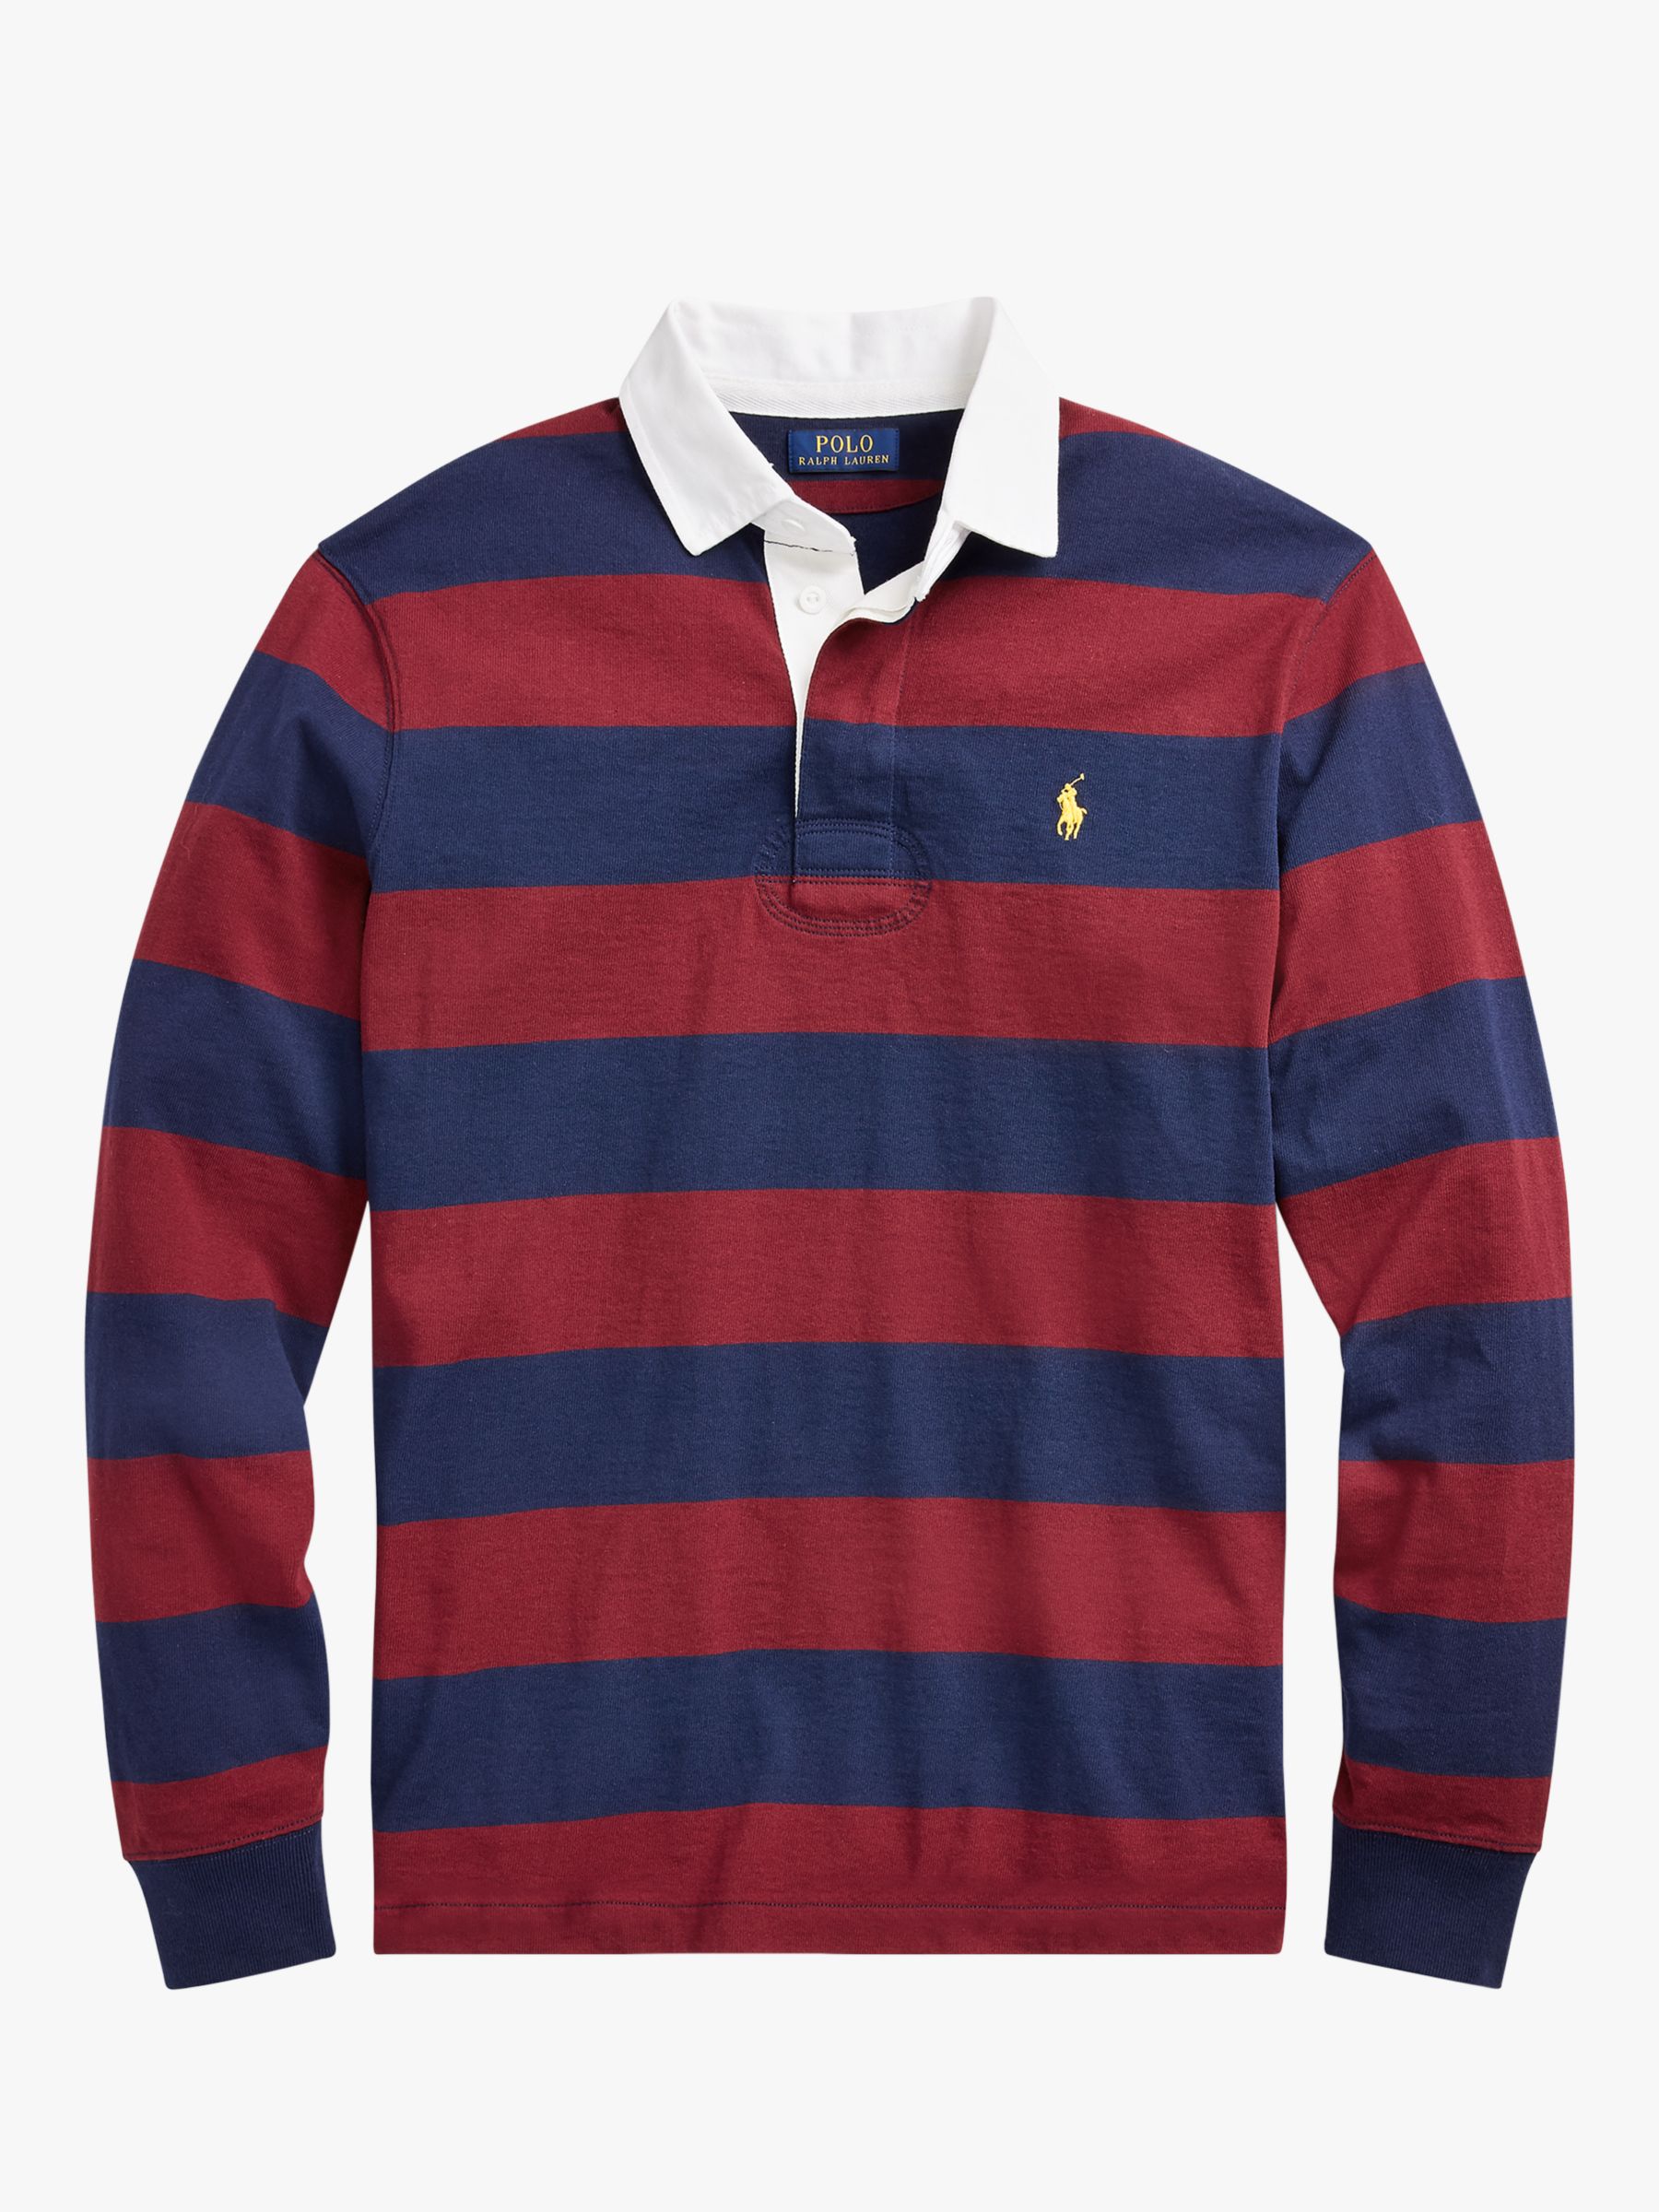 Polo Ralph Lauren Stripe Rugby Shirt at 